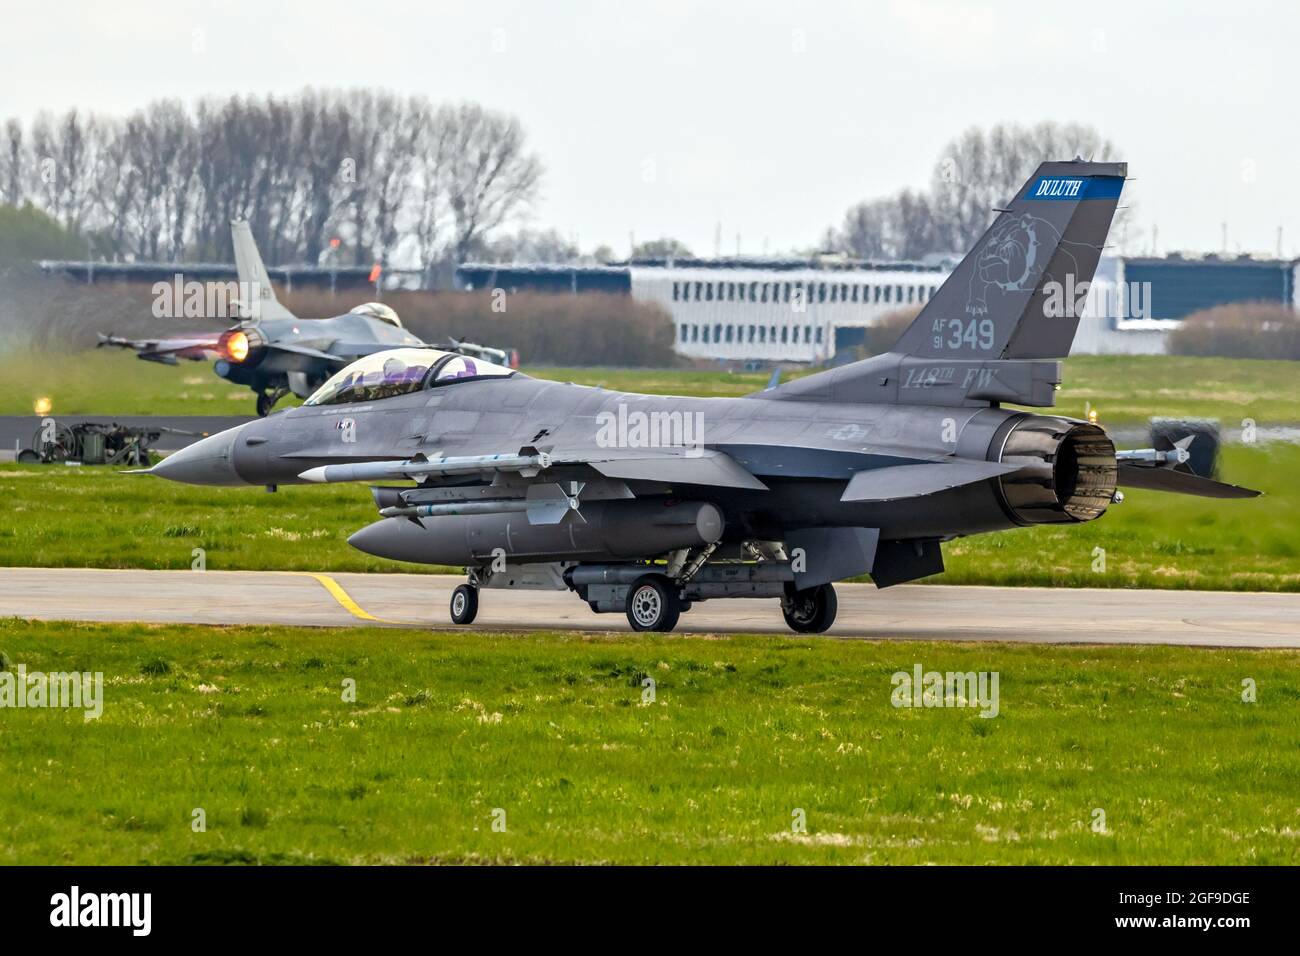 US Air Force F-16C fighter jet plane from 148th FW Minnesota Air National Guard before take off from Leeuwarden Airbase. The Netherlands - April 11, 2 Stock Photo